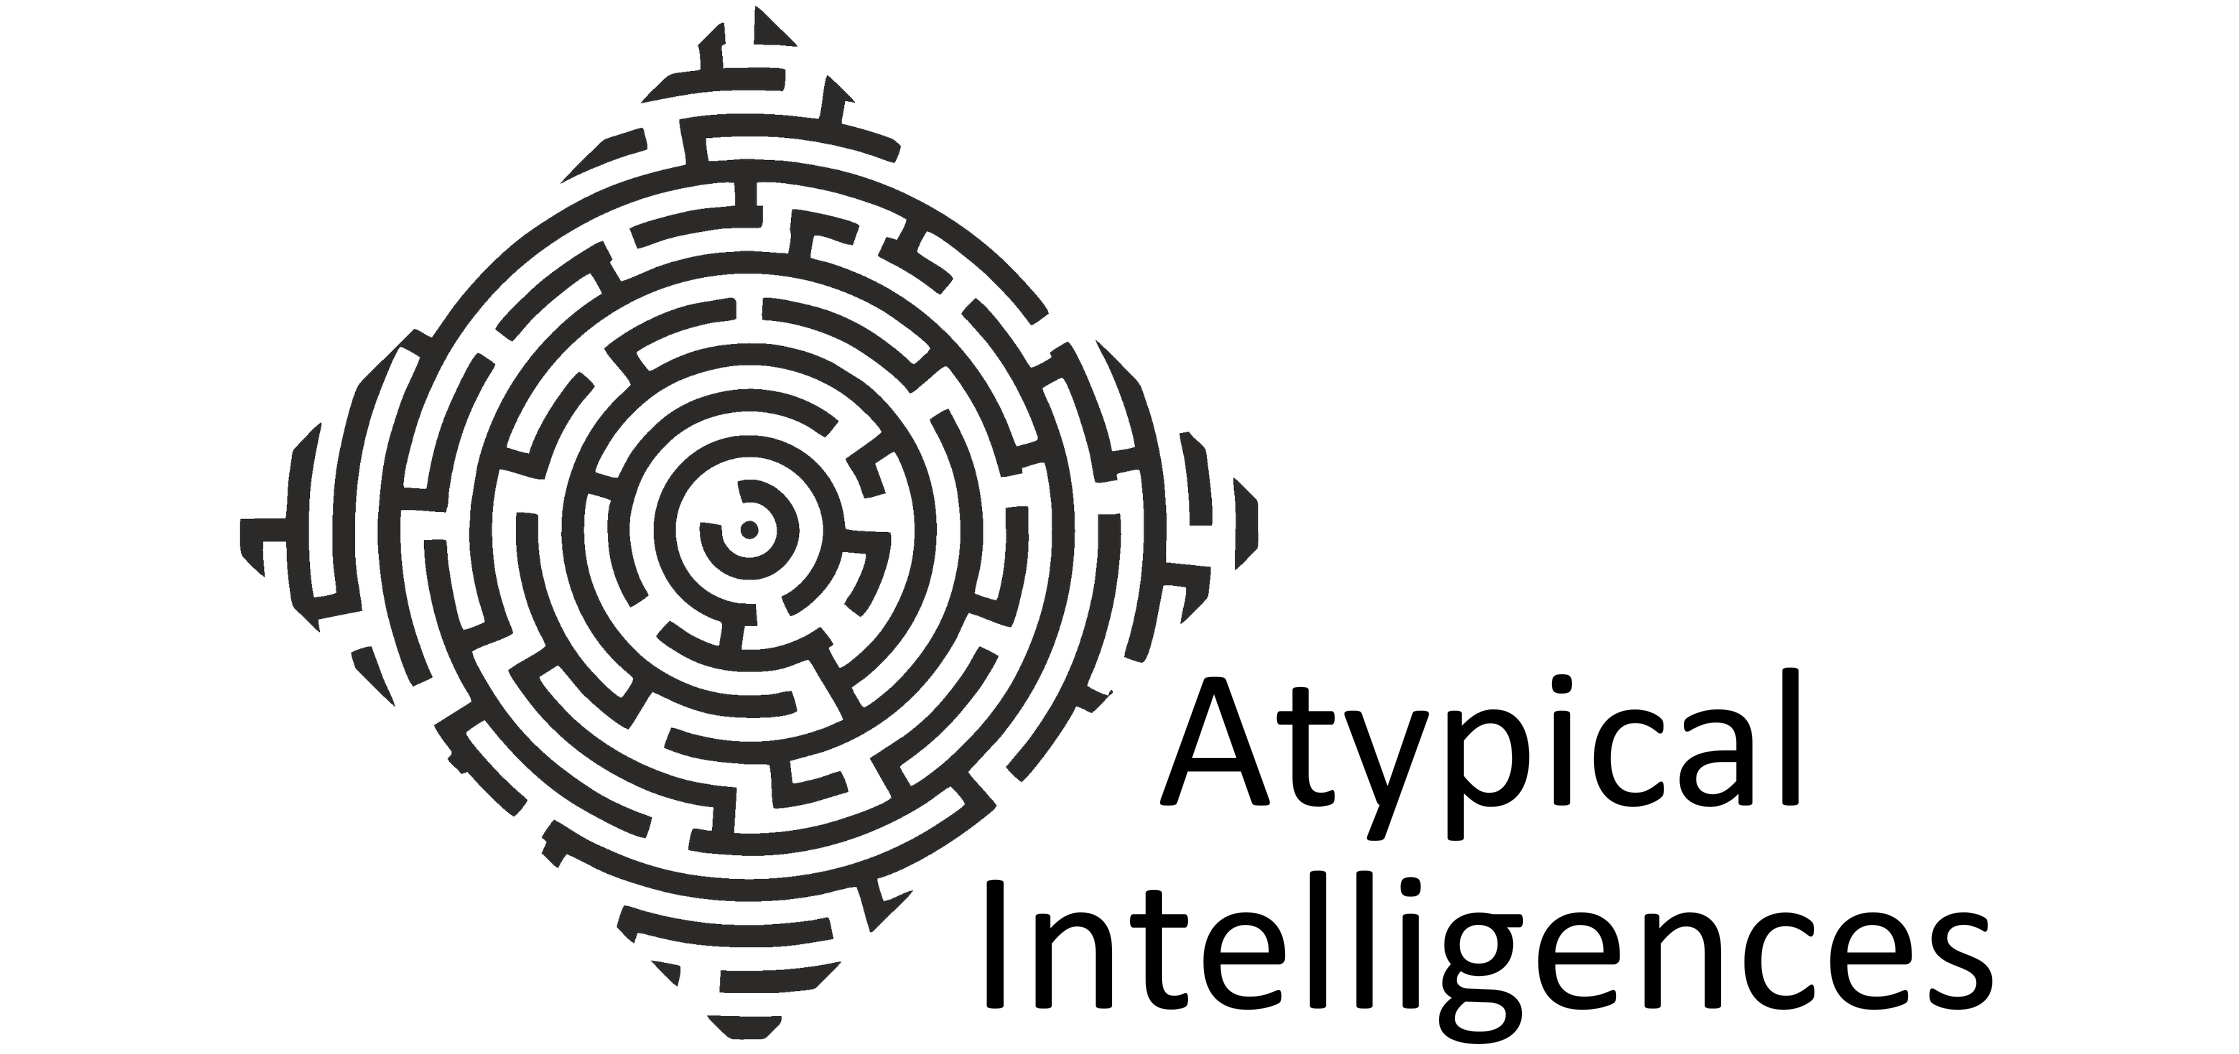 Atypical Intelligences 